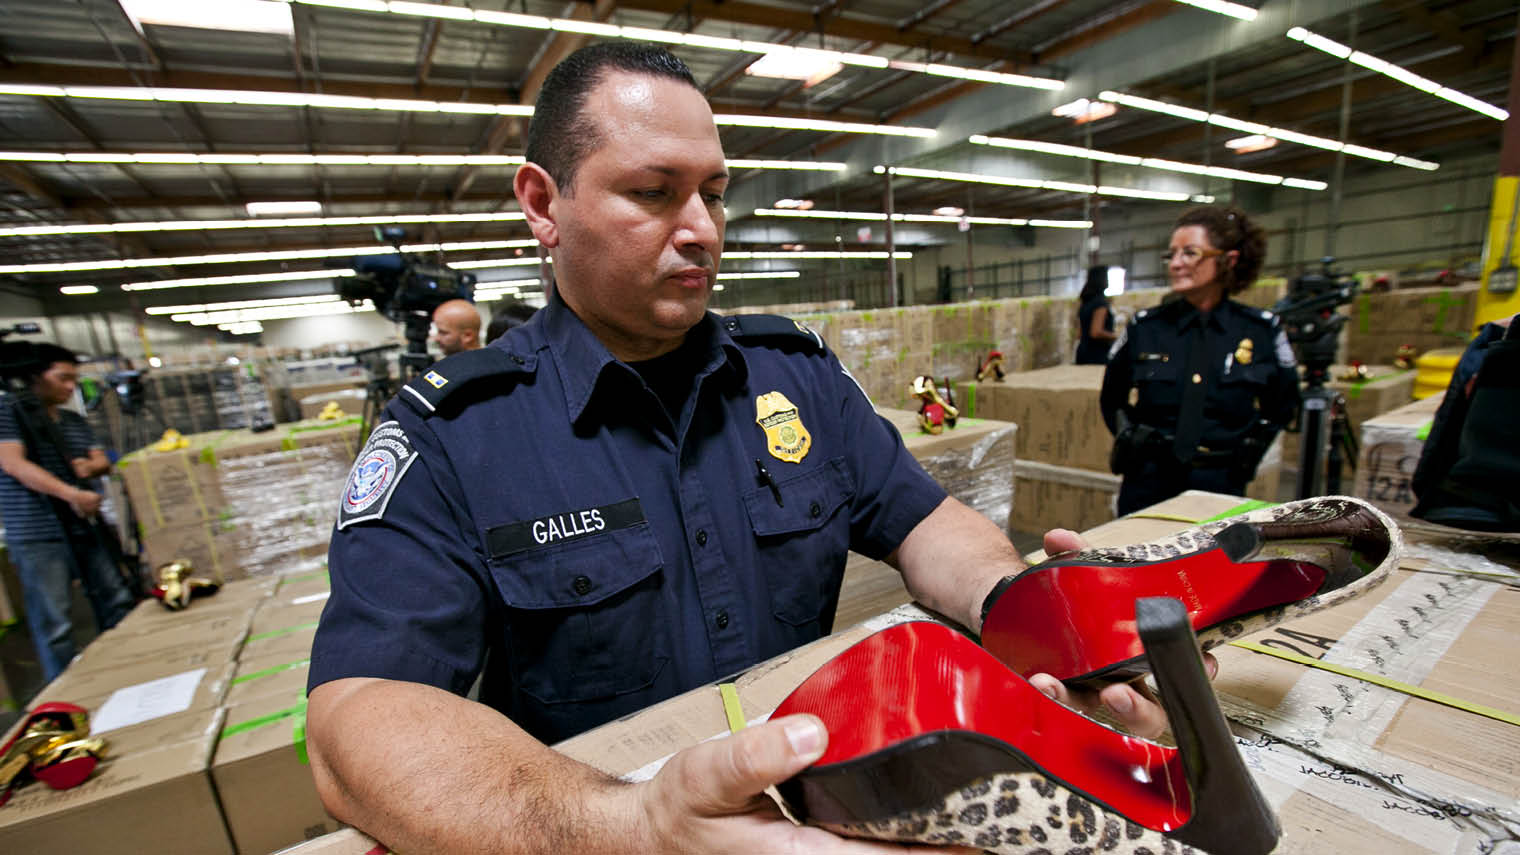 US Customs and Border Protection official examining a pair of counterfeit Christian Louboutin shoes